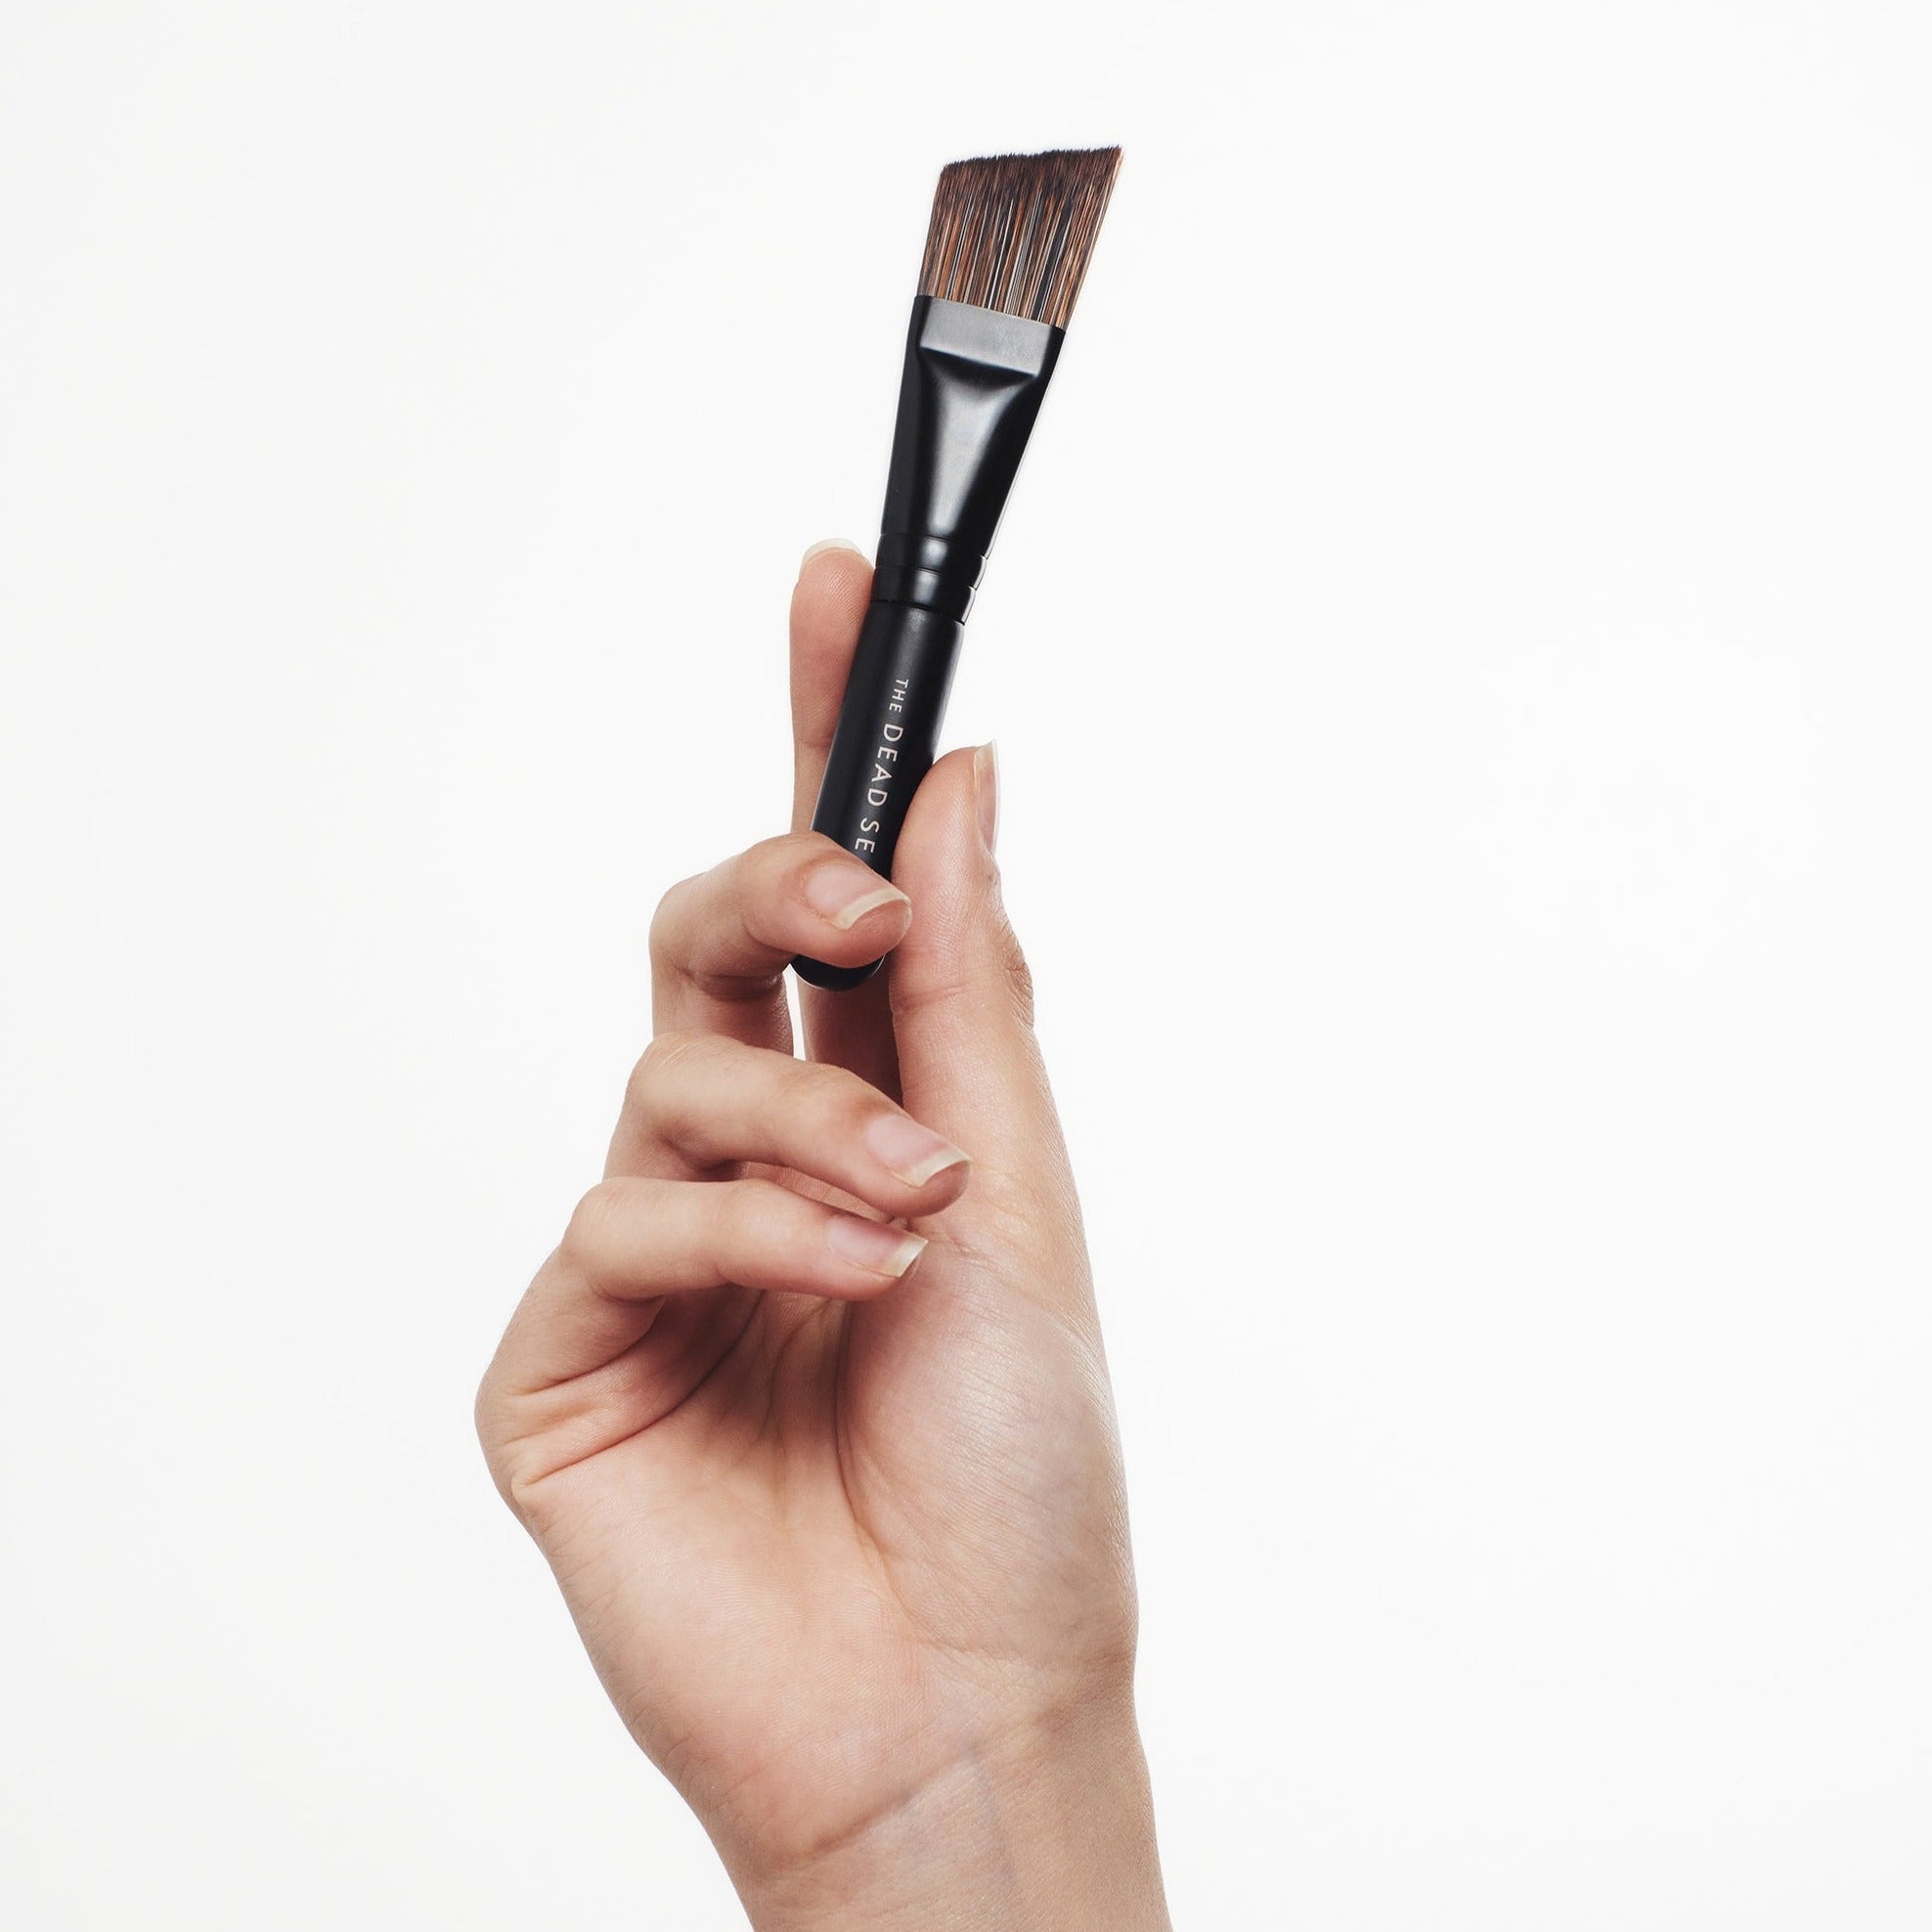 The Dead Sea Co.'s brush is meticulously crafted for precise application, featuring a unique angled design that effortlessly follows the contours of your face for even coverage.